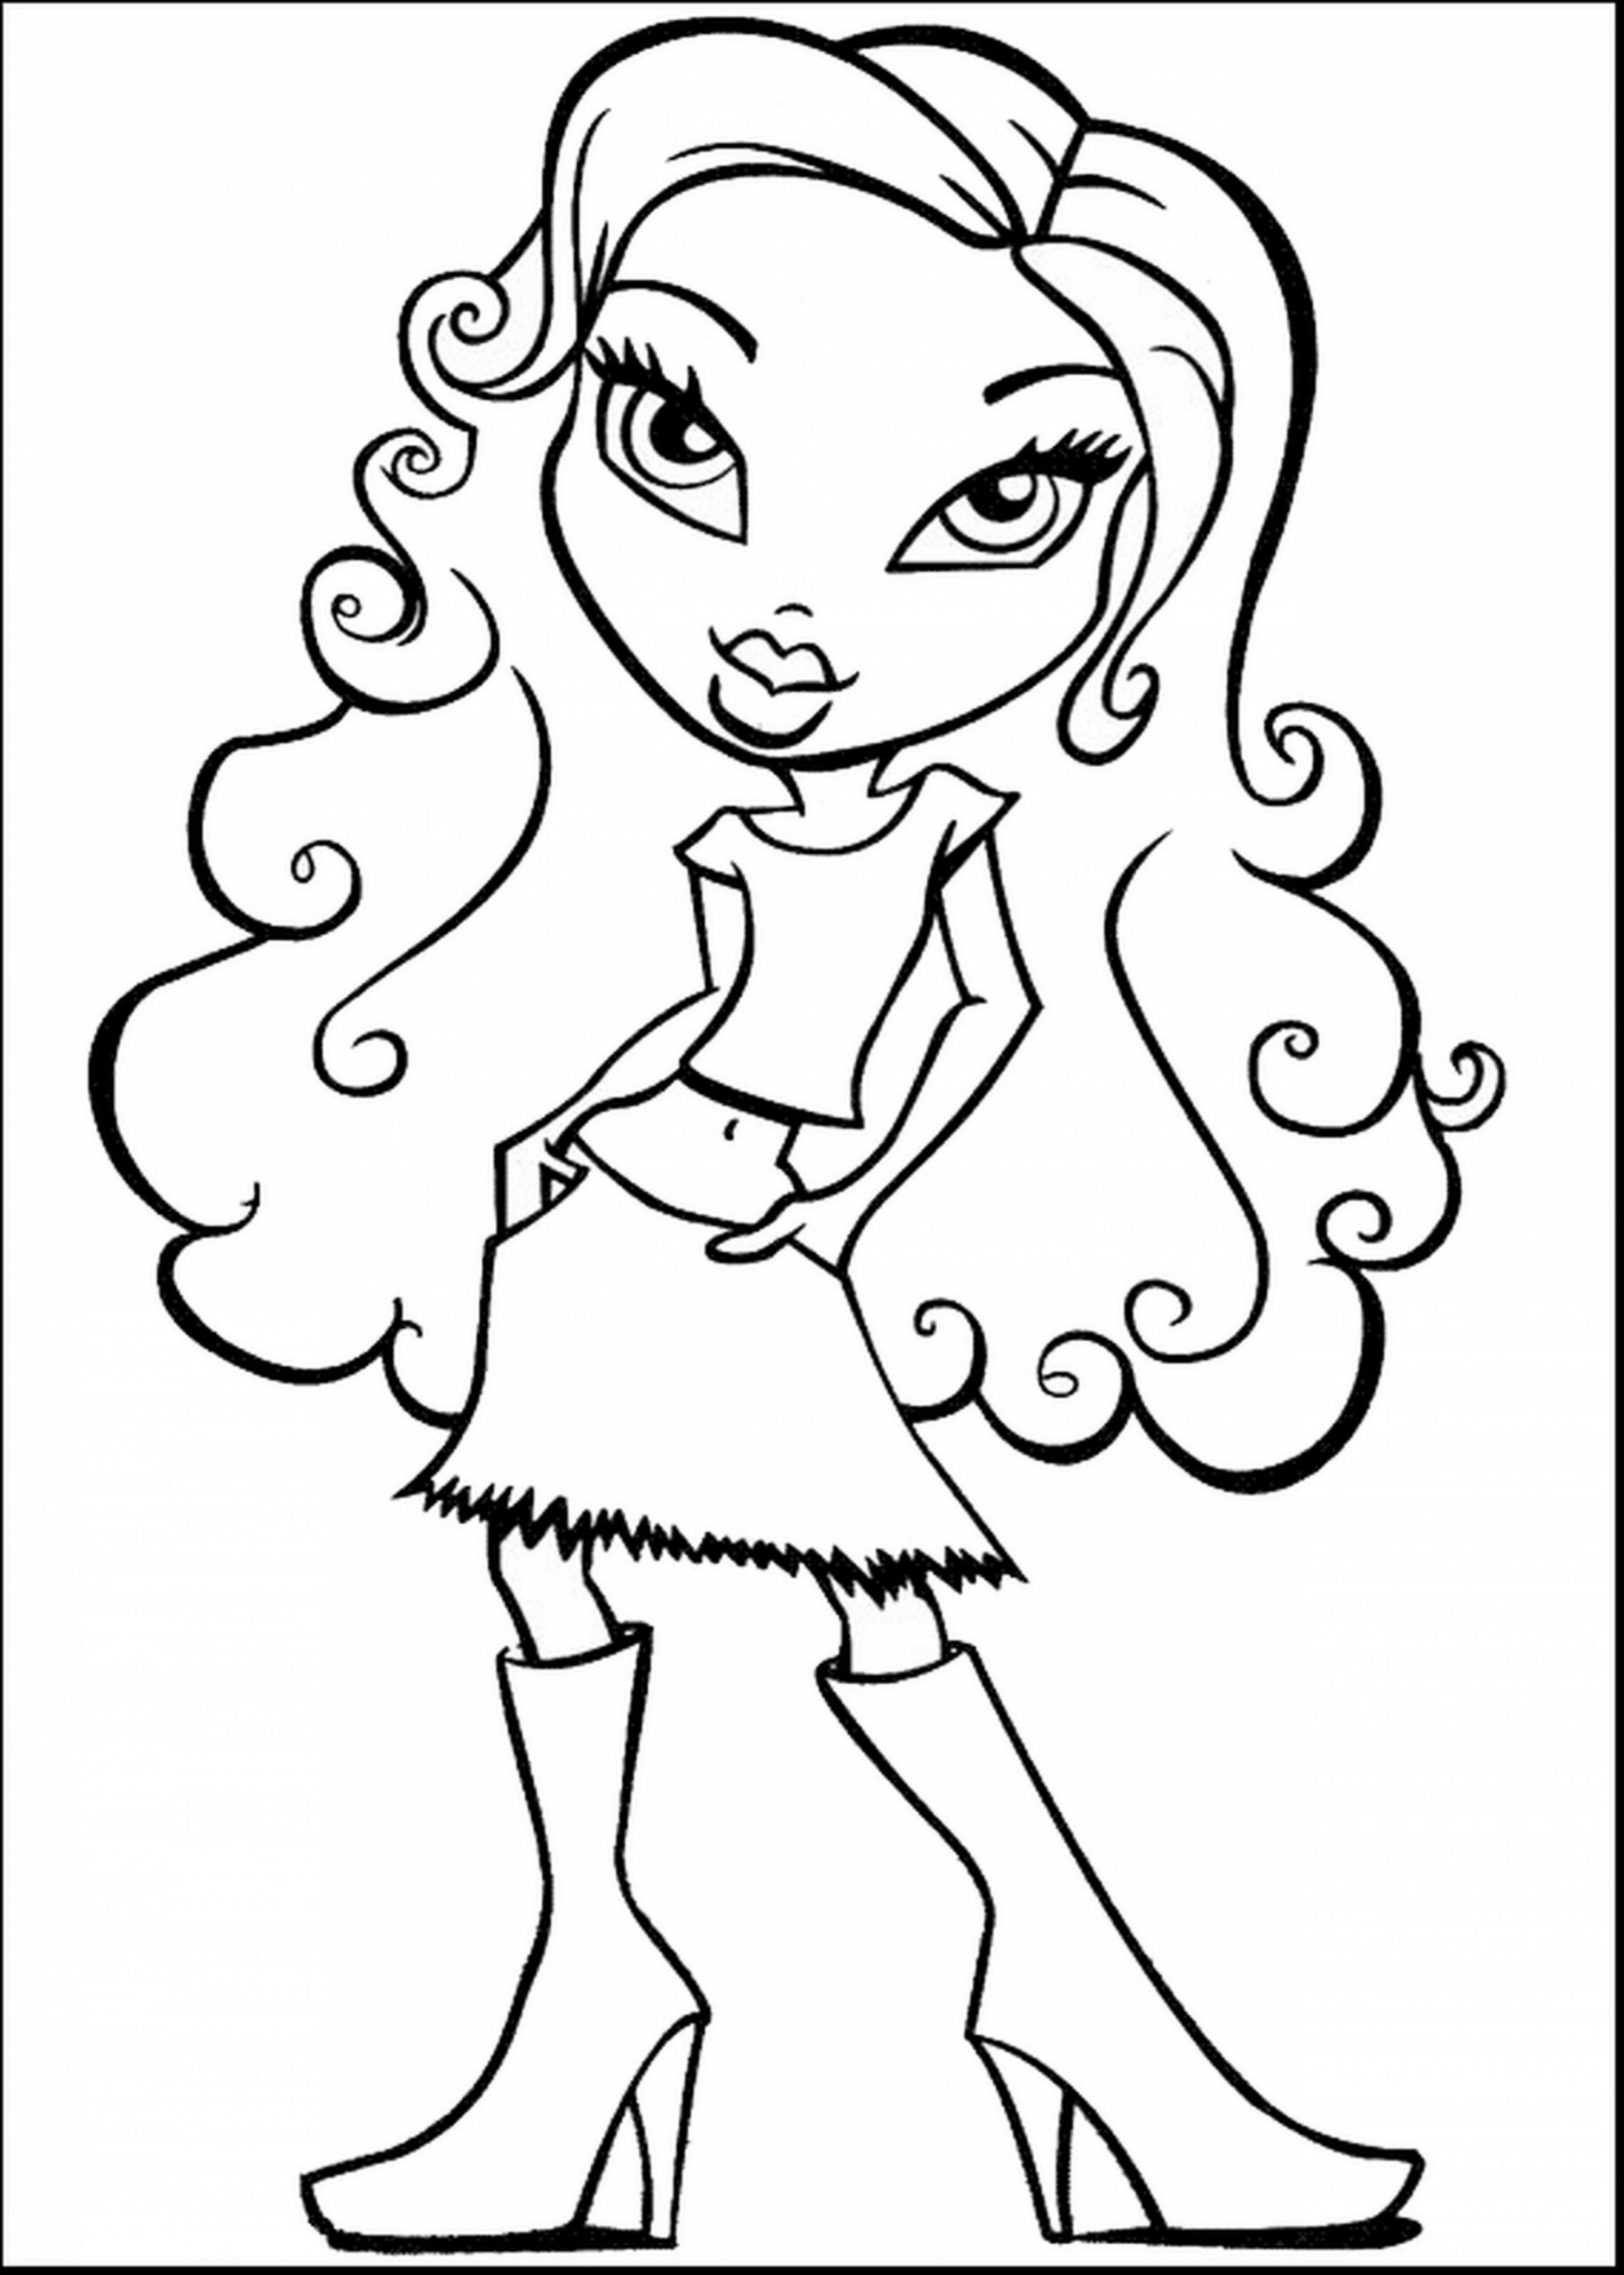 bratz dolls coloring pages for kids beautiful fantastic bratz dolls coloring pages with bratz coloring pages